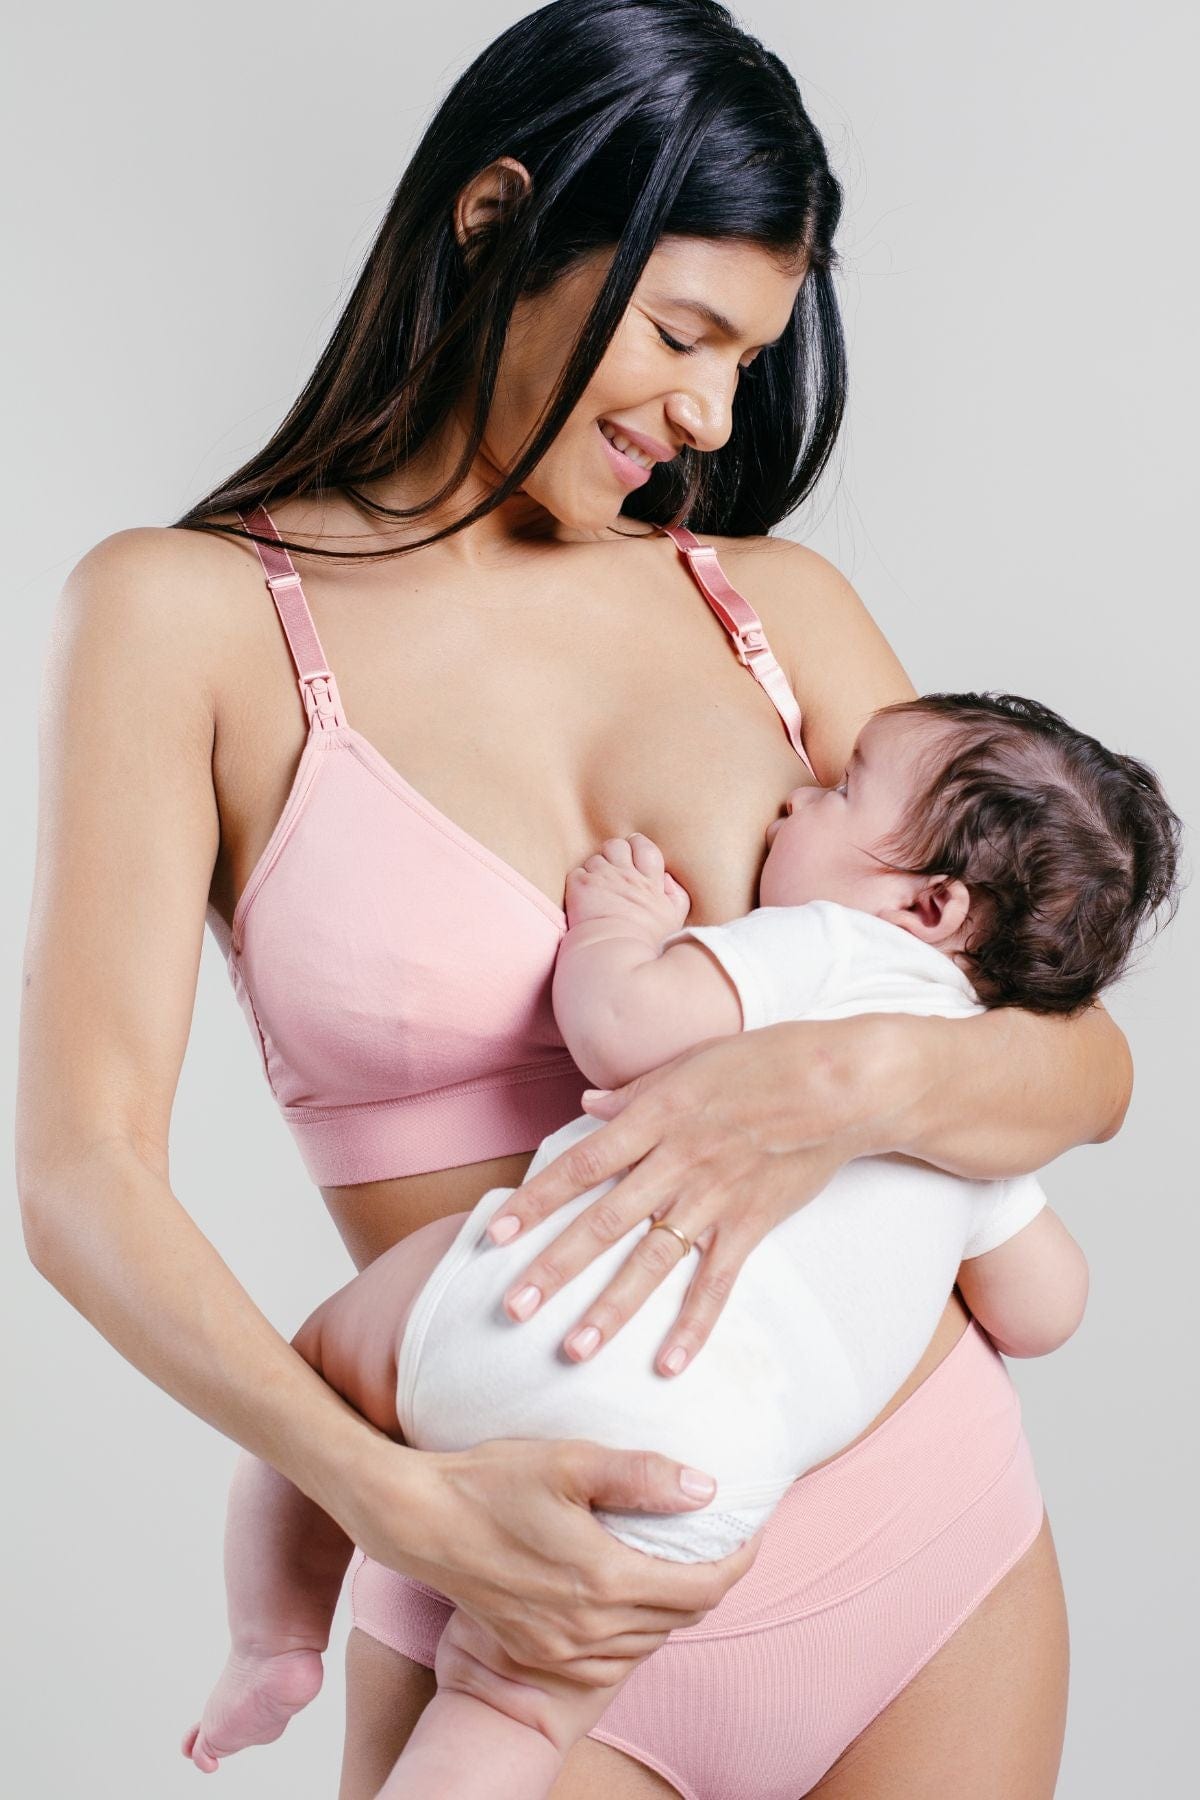 Simple Wishes Supermom All-in-One Bra - Nude 36C, Babies & Kids